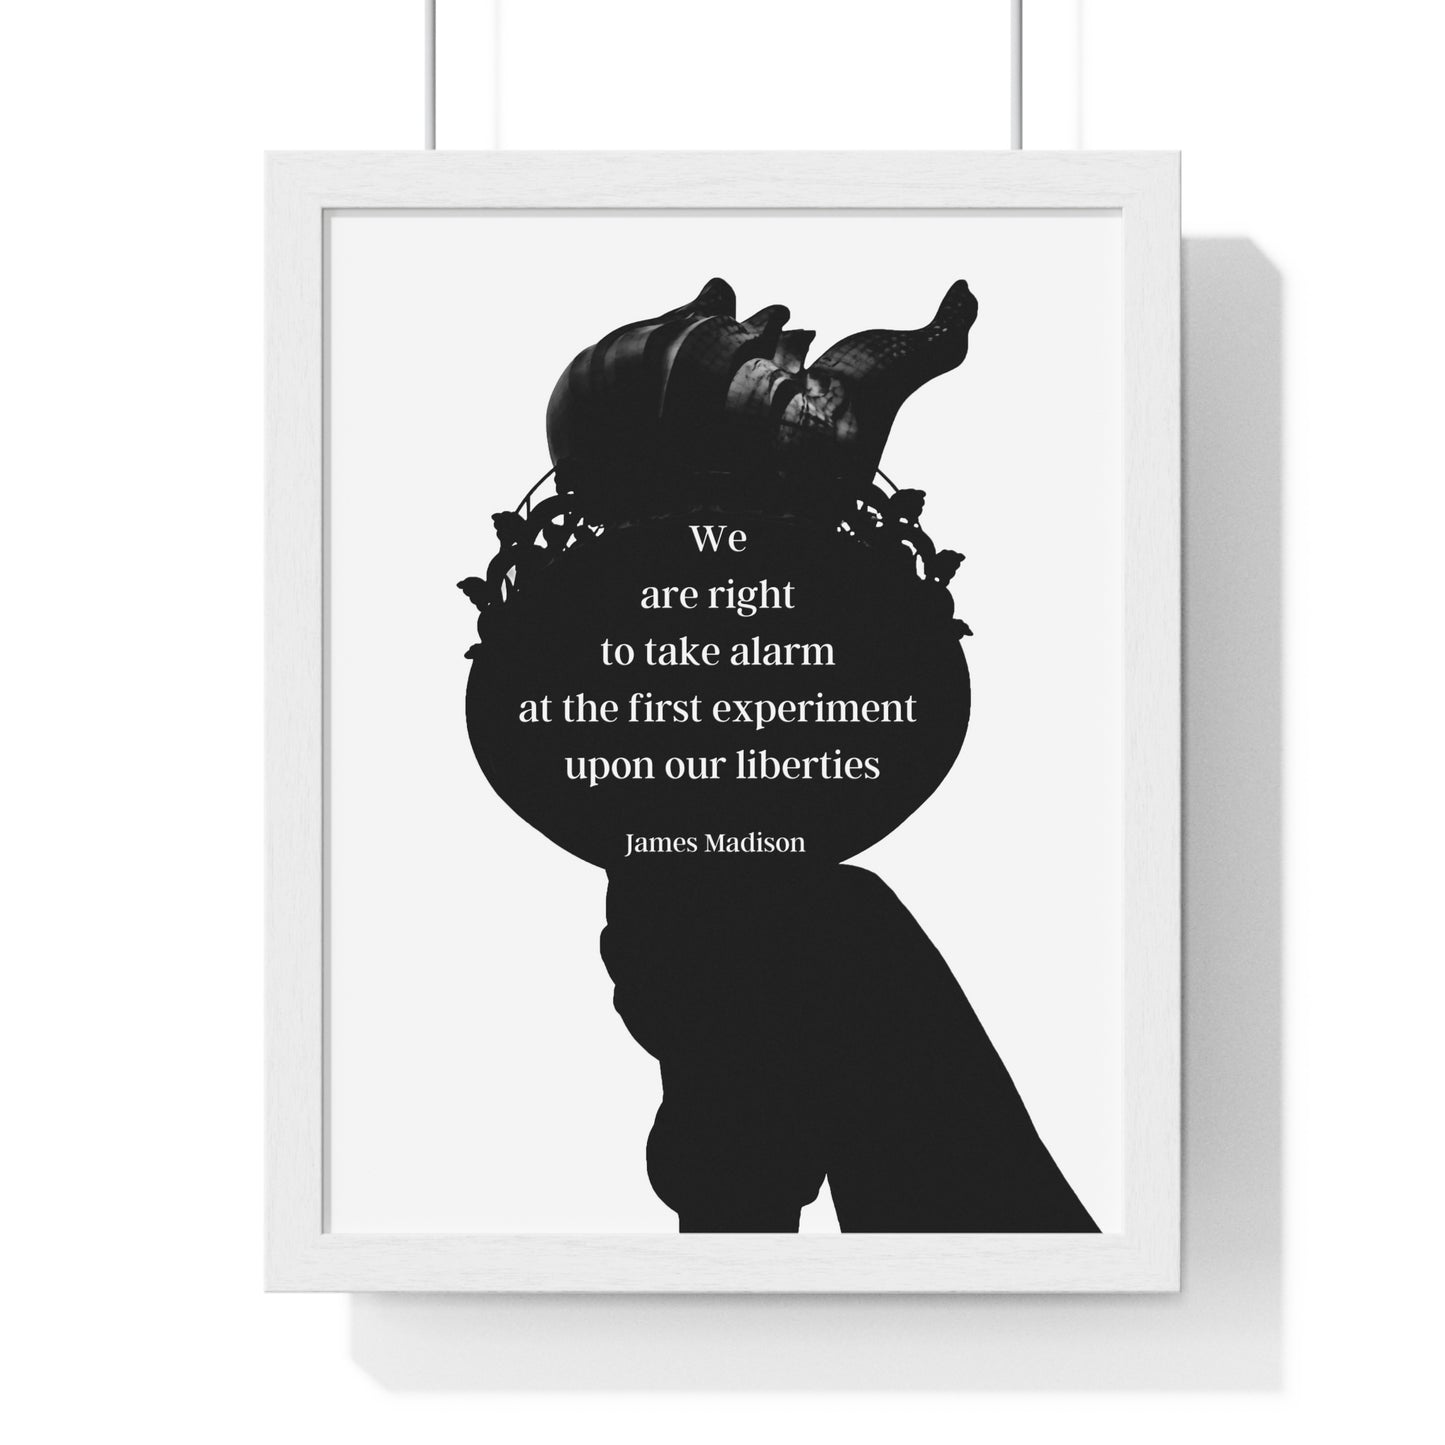 James Madison Quote 4, Poster Art, Dark Liberty Torch Print, 4th President of the United States, American Patriots, Statue of Liberty, Democracy, Freedom, Justice, Political Art, Poster Prints, Presidential Quotes, Inspirational Quotes